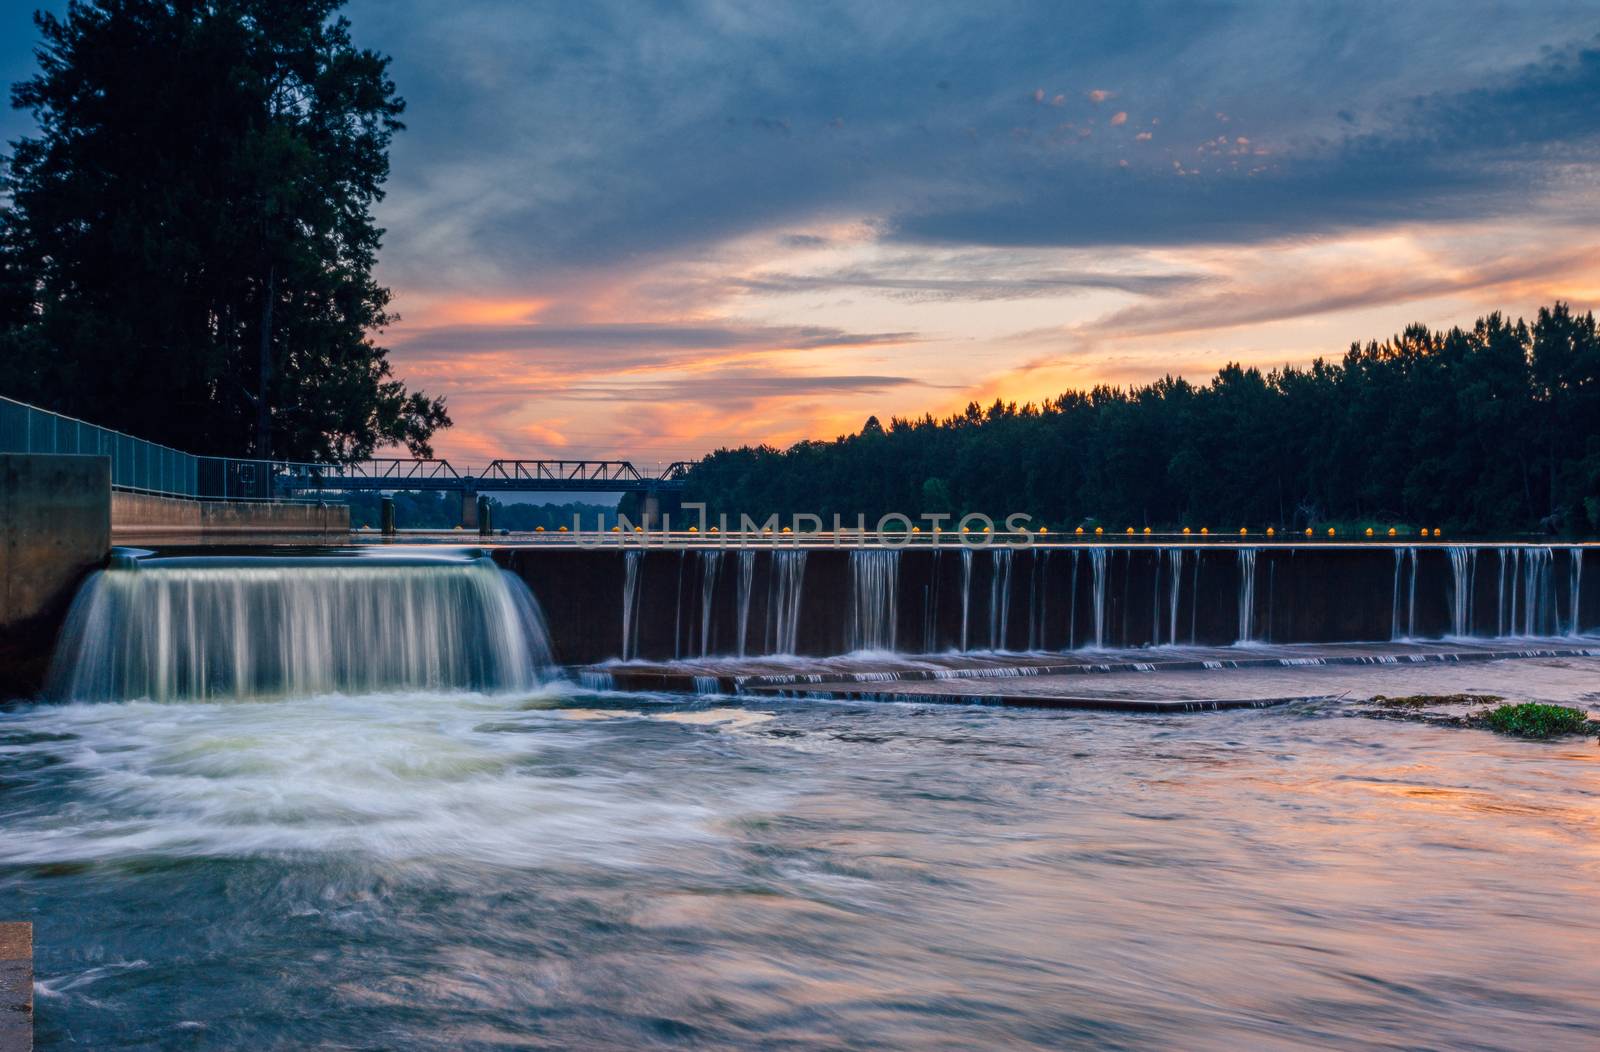 The overflow at Penrith Weir as the sunset colours some of the clouds in the sky and reflects in the rushing waters below.